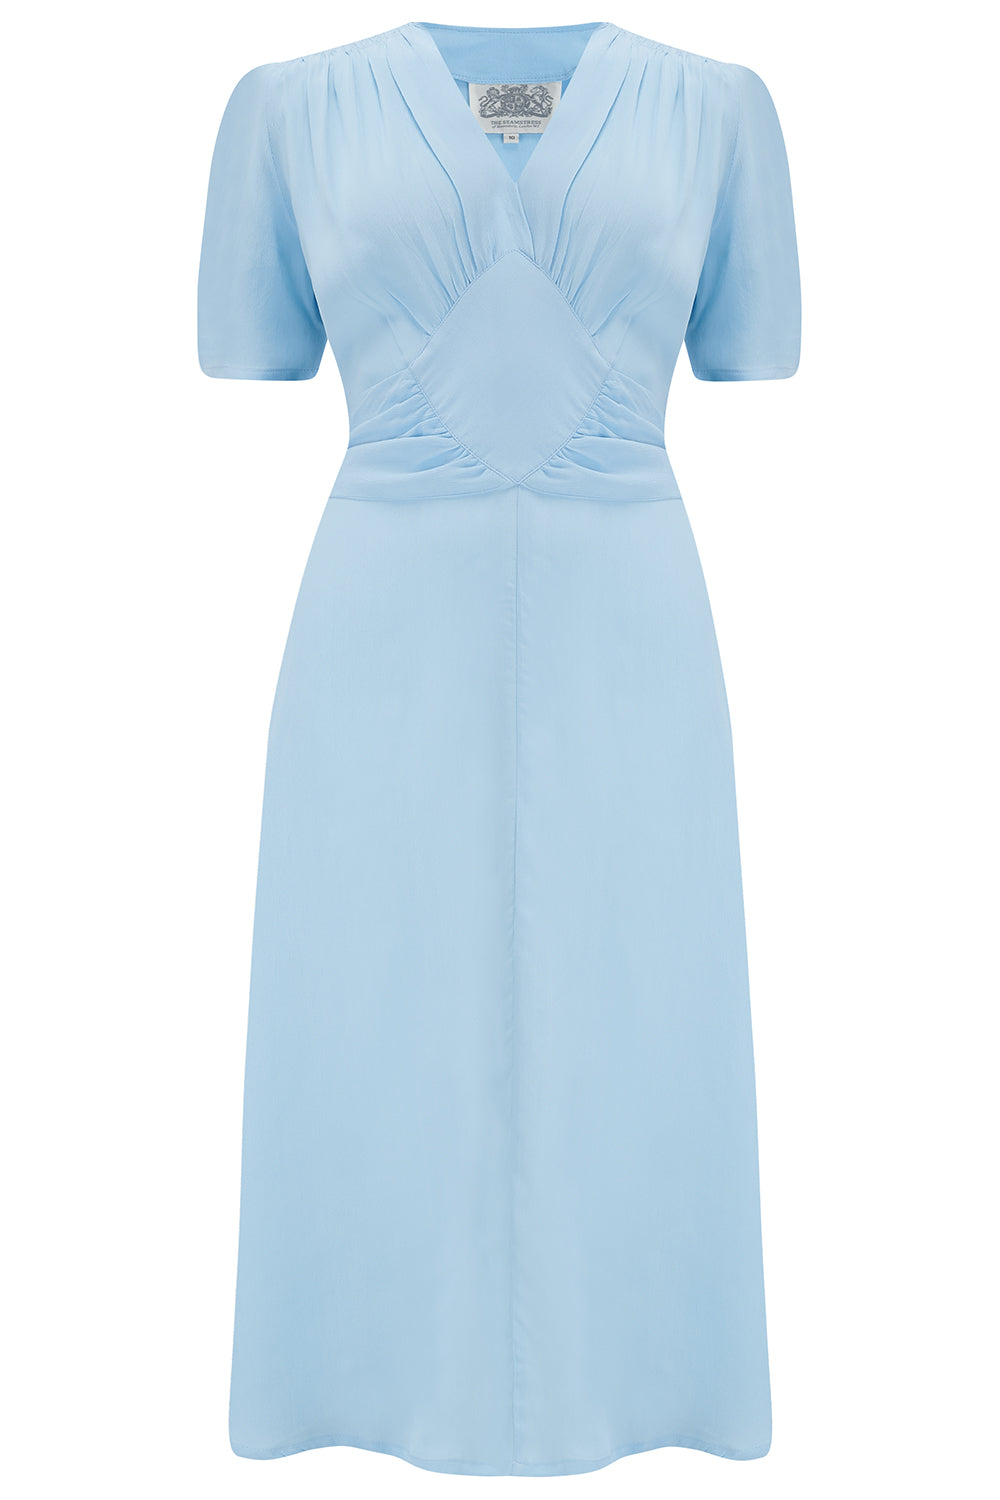 Ruby Dress in Powder Blue, A Classic & Authentic 1940s Vintage Inspired Style By The Seamstress Of Bloomsbury - CC41, Goodwood Revival, Twinwood Festival, Viva Las Vegas Rockabilly Weekend Rock n Romance The Seamstress Of Bloomsbury